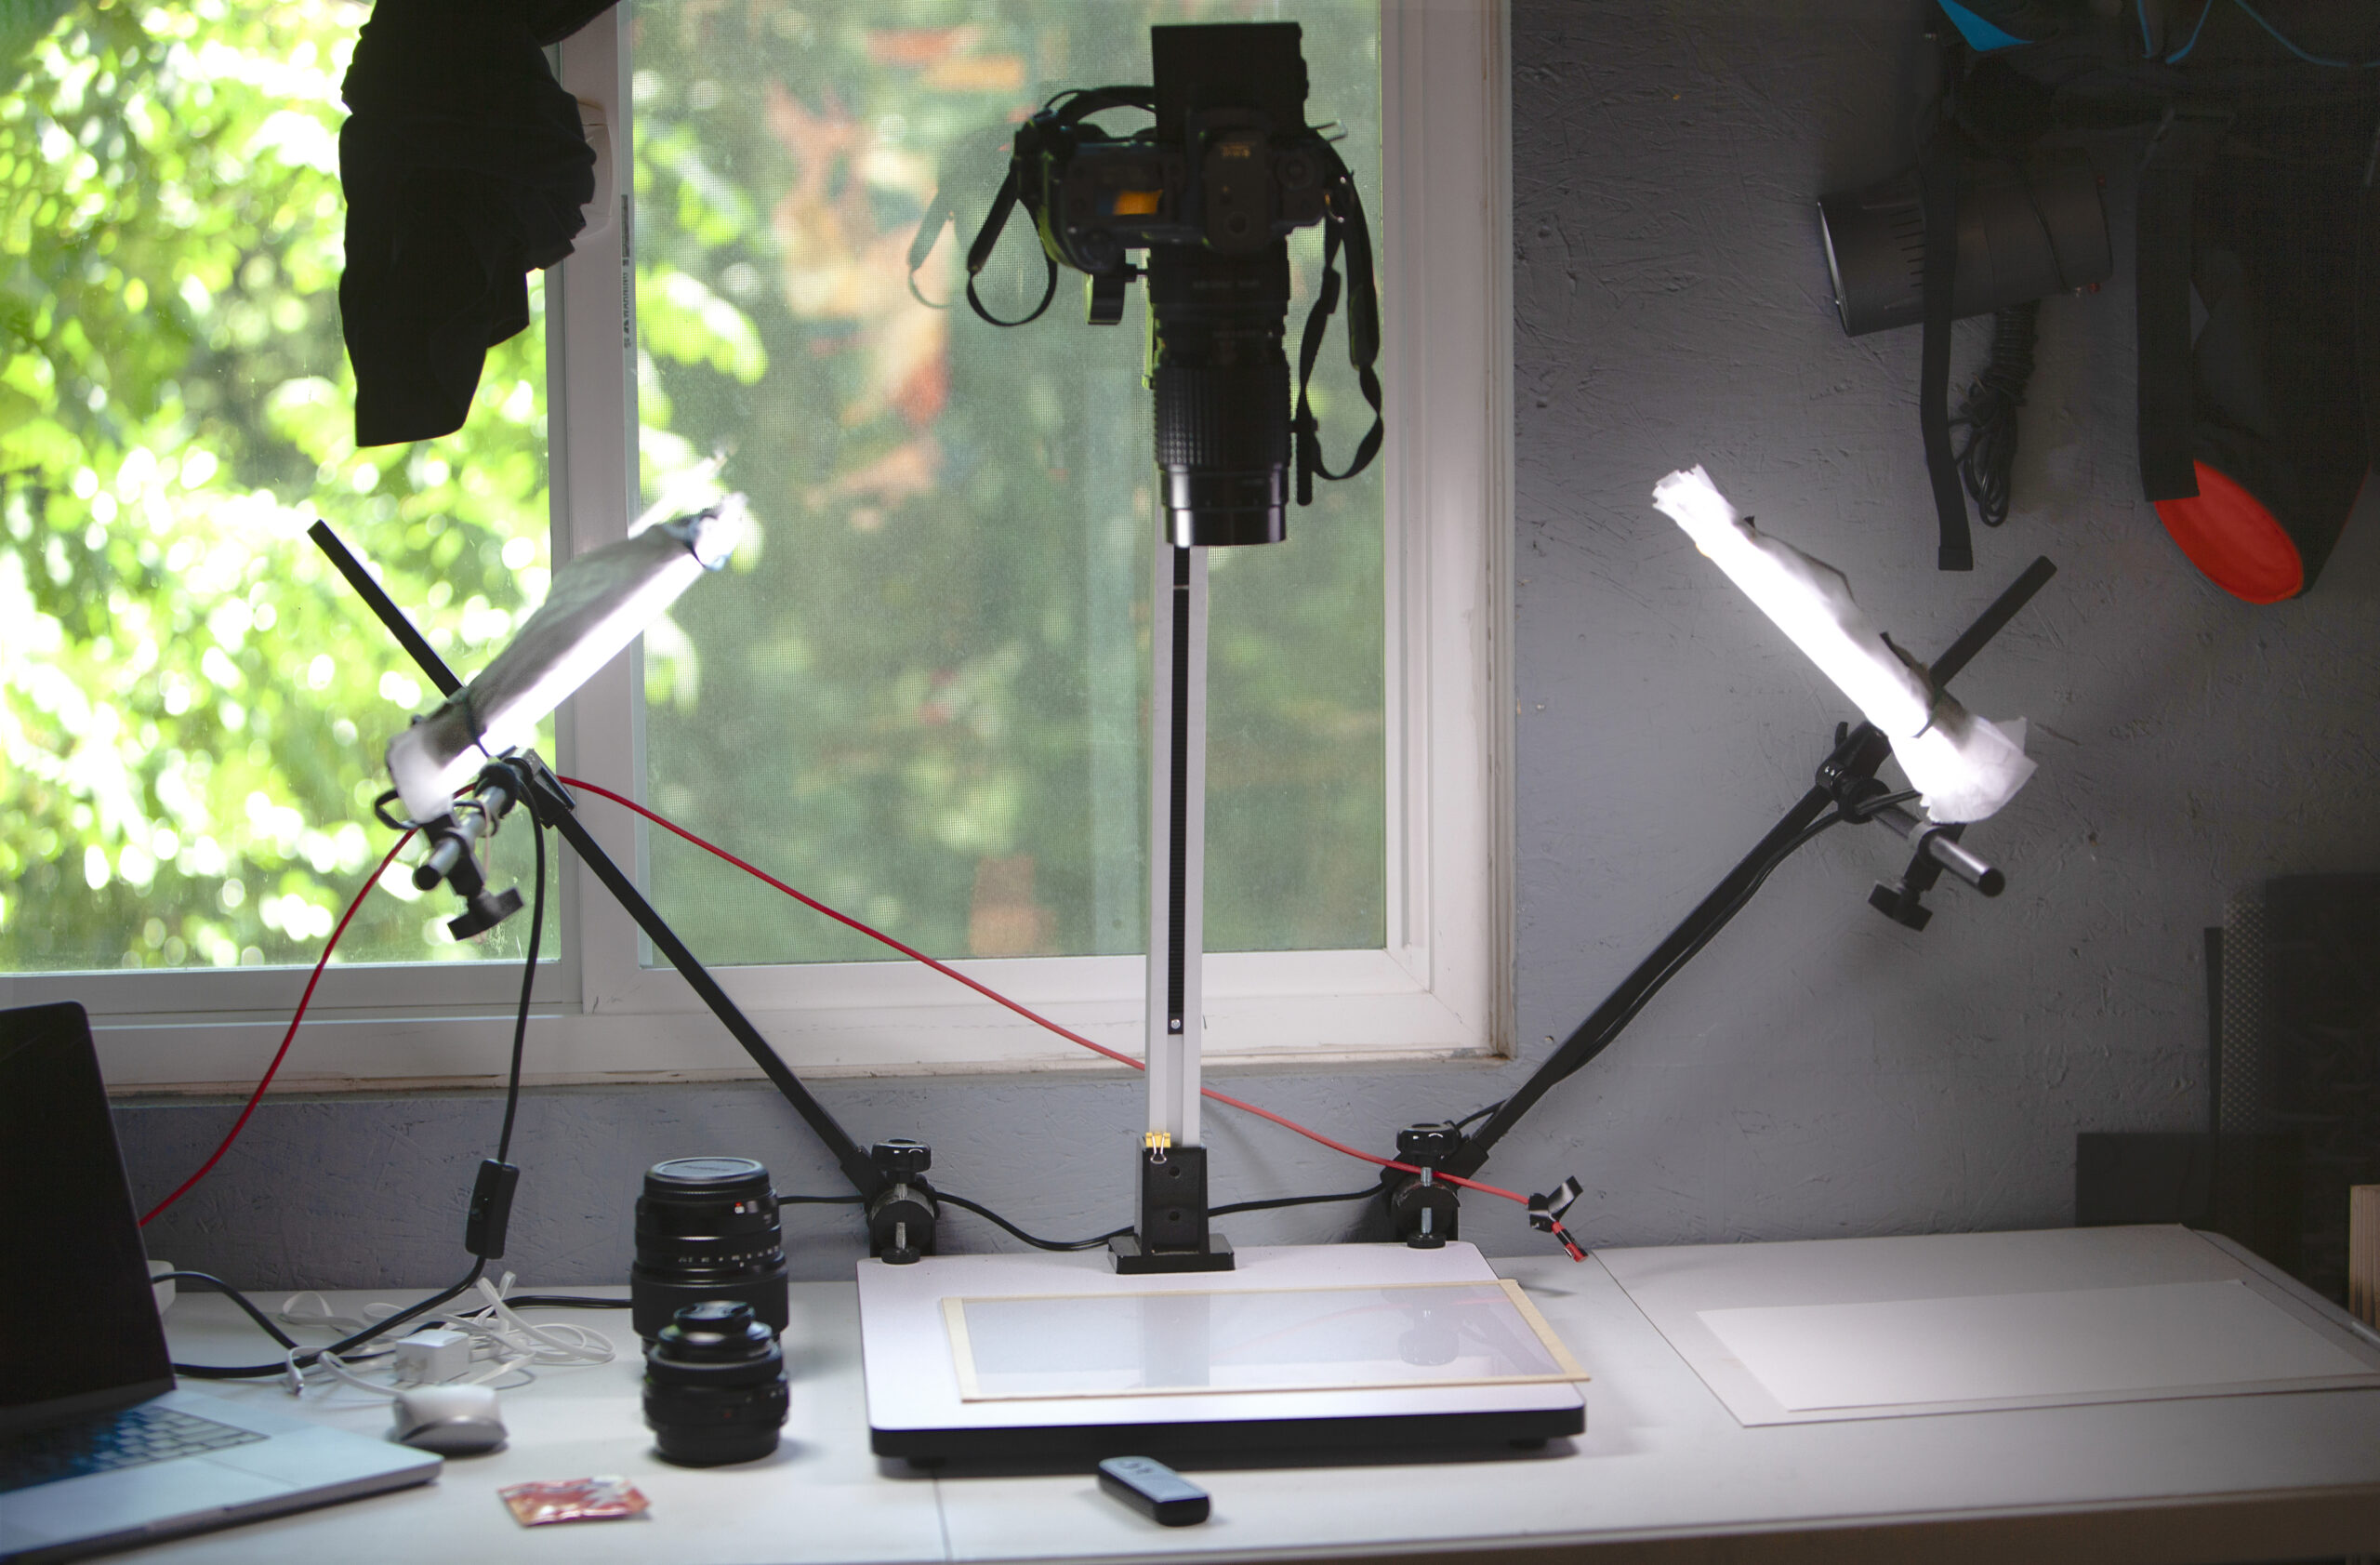 Set up for digitizing film negatives with Fuji GFX100 and special lighting equipment